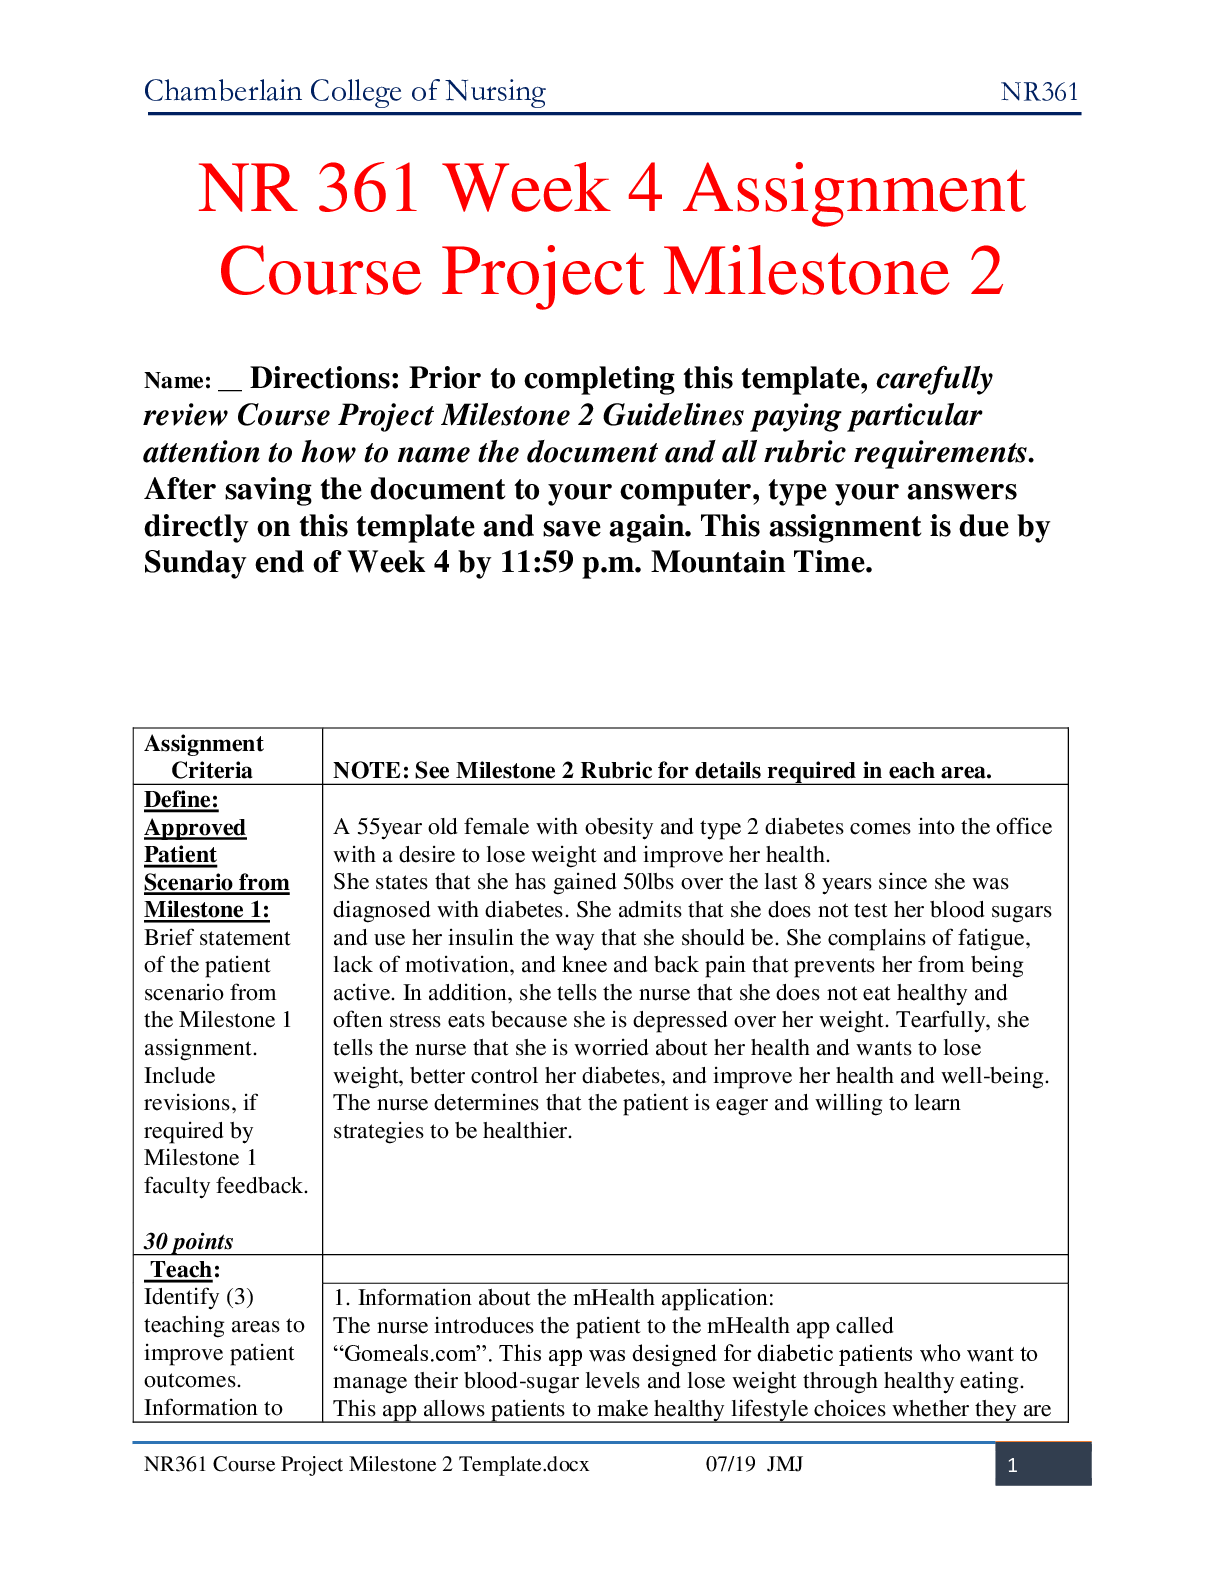 week 4 assignment course project milestone 2